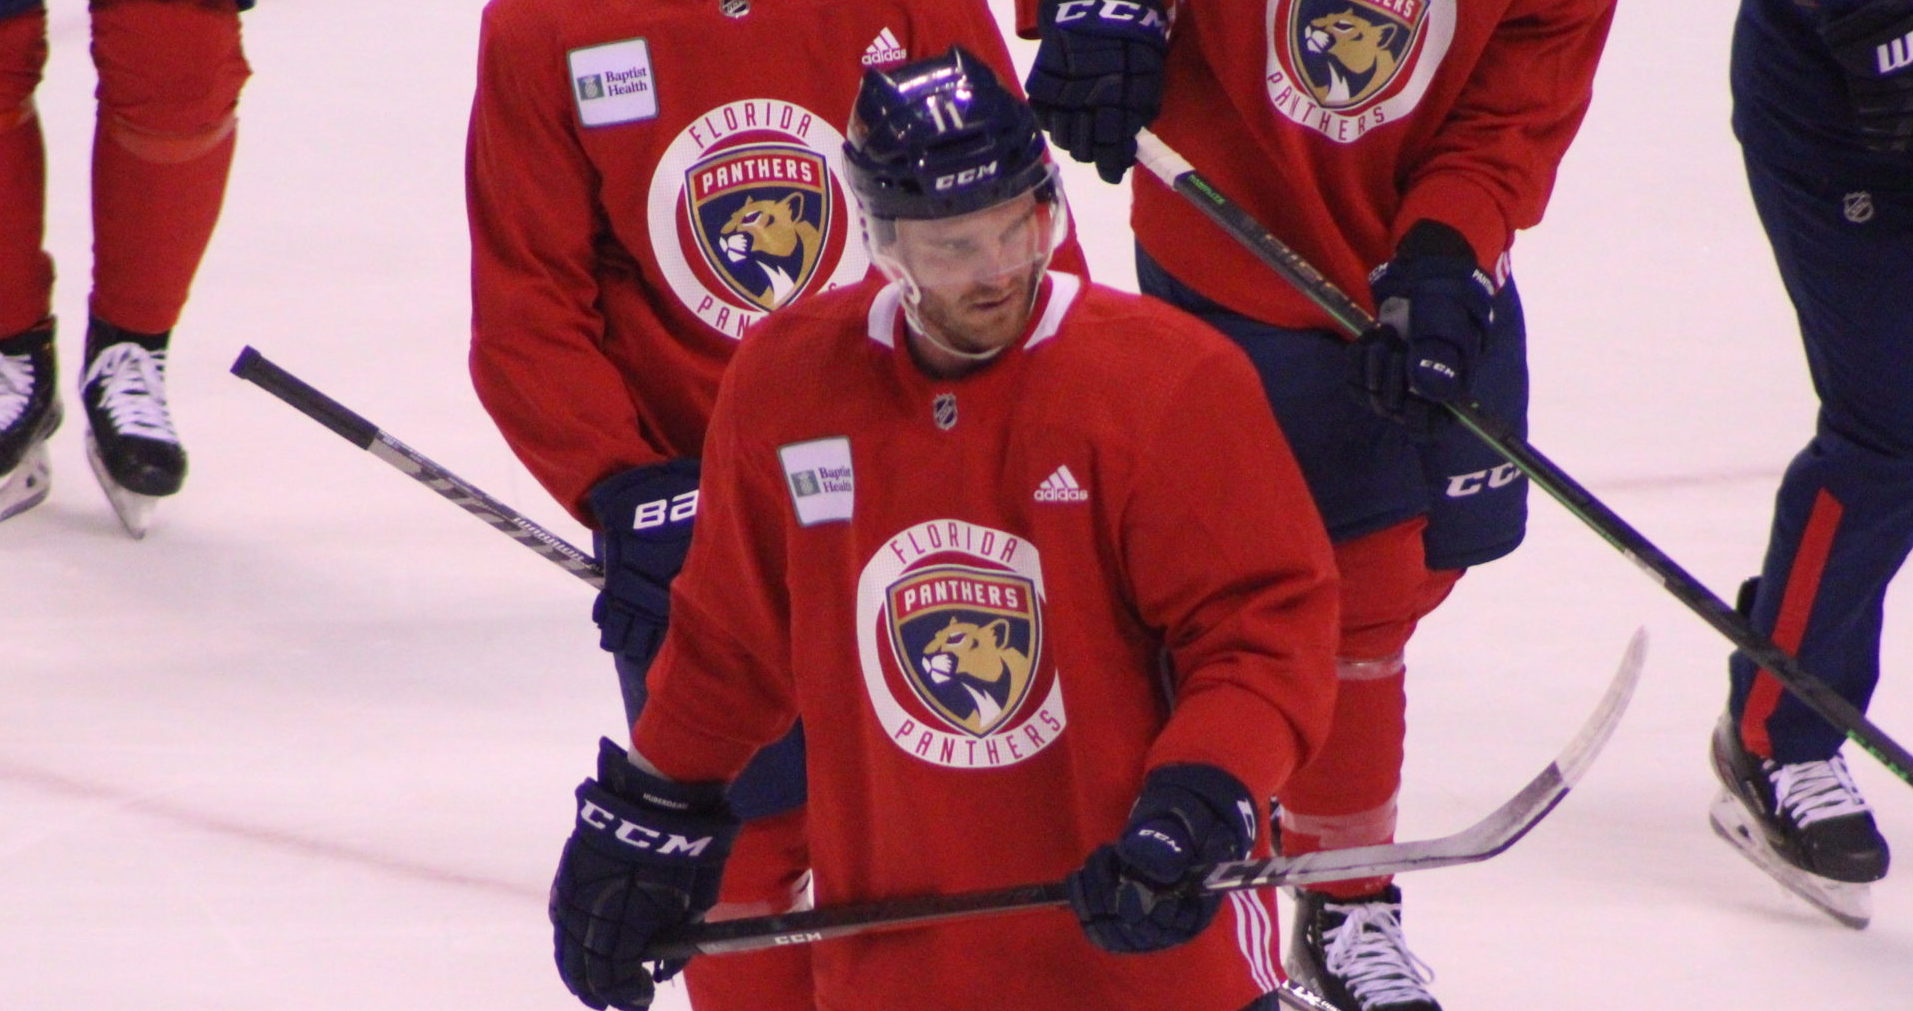 Florida Panthers - It was a memorable week for the Cats as they announced  hosting the 2021 NHL All-Star Game and Jonathan Huberdeau shined in St.  Louis! Gear up for tomorrow's afternoon